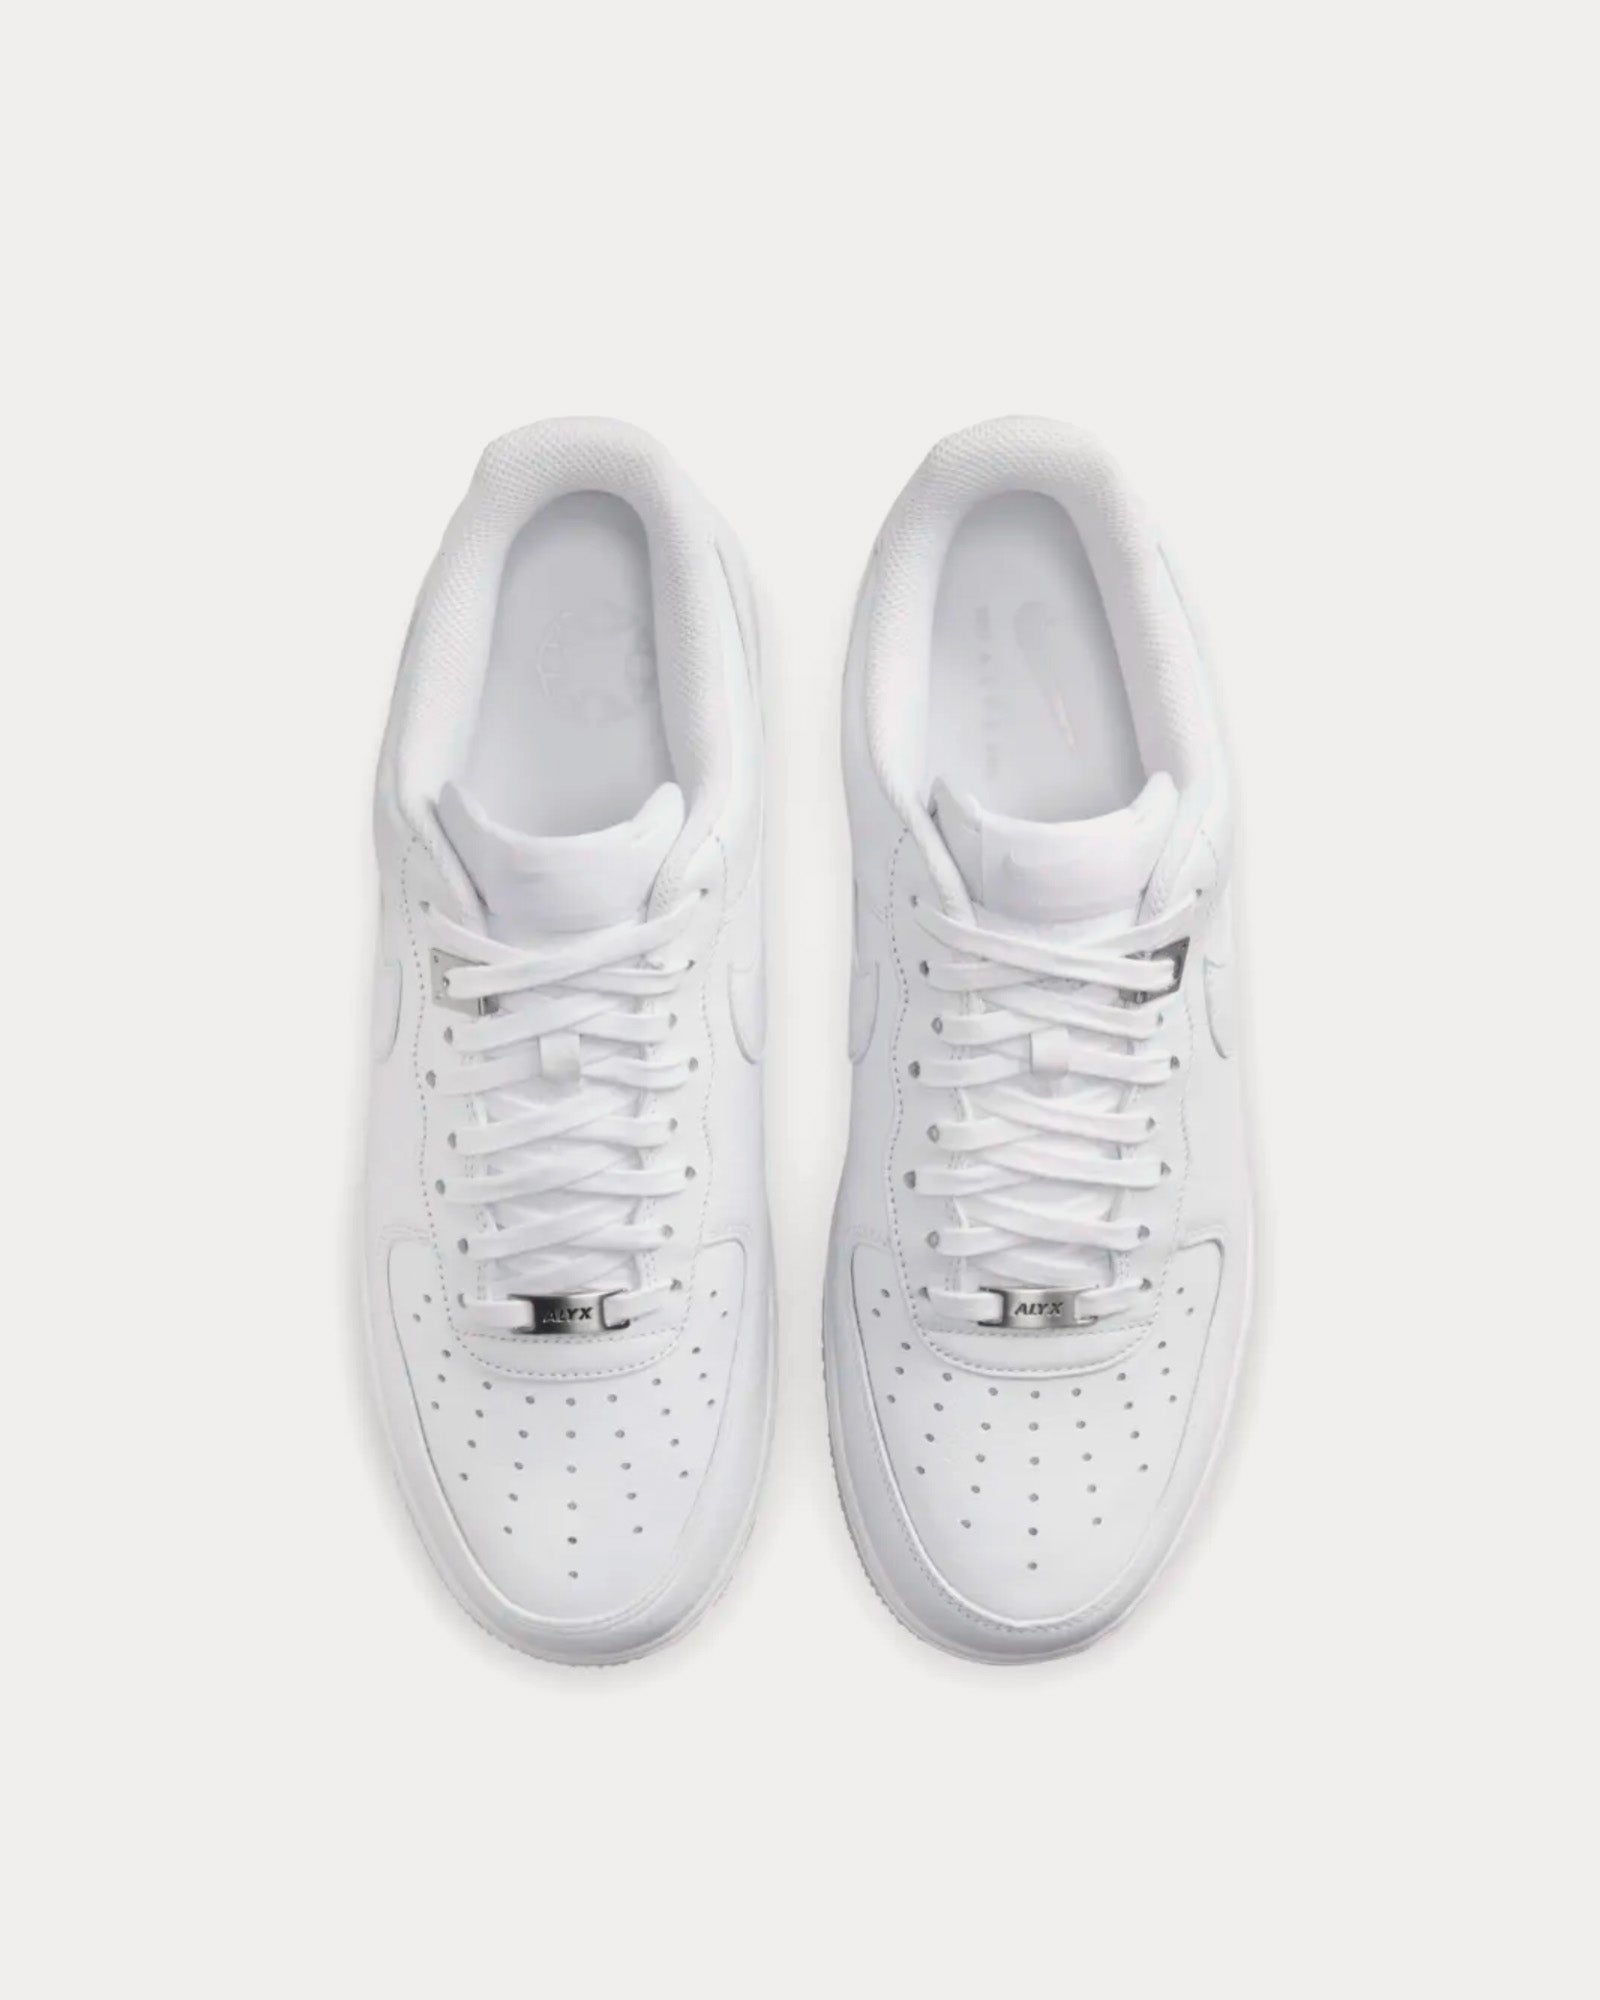 Nike x ALYX - AF-1 Low White Low Top Sneakers